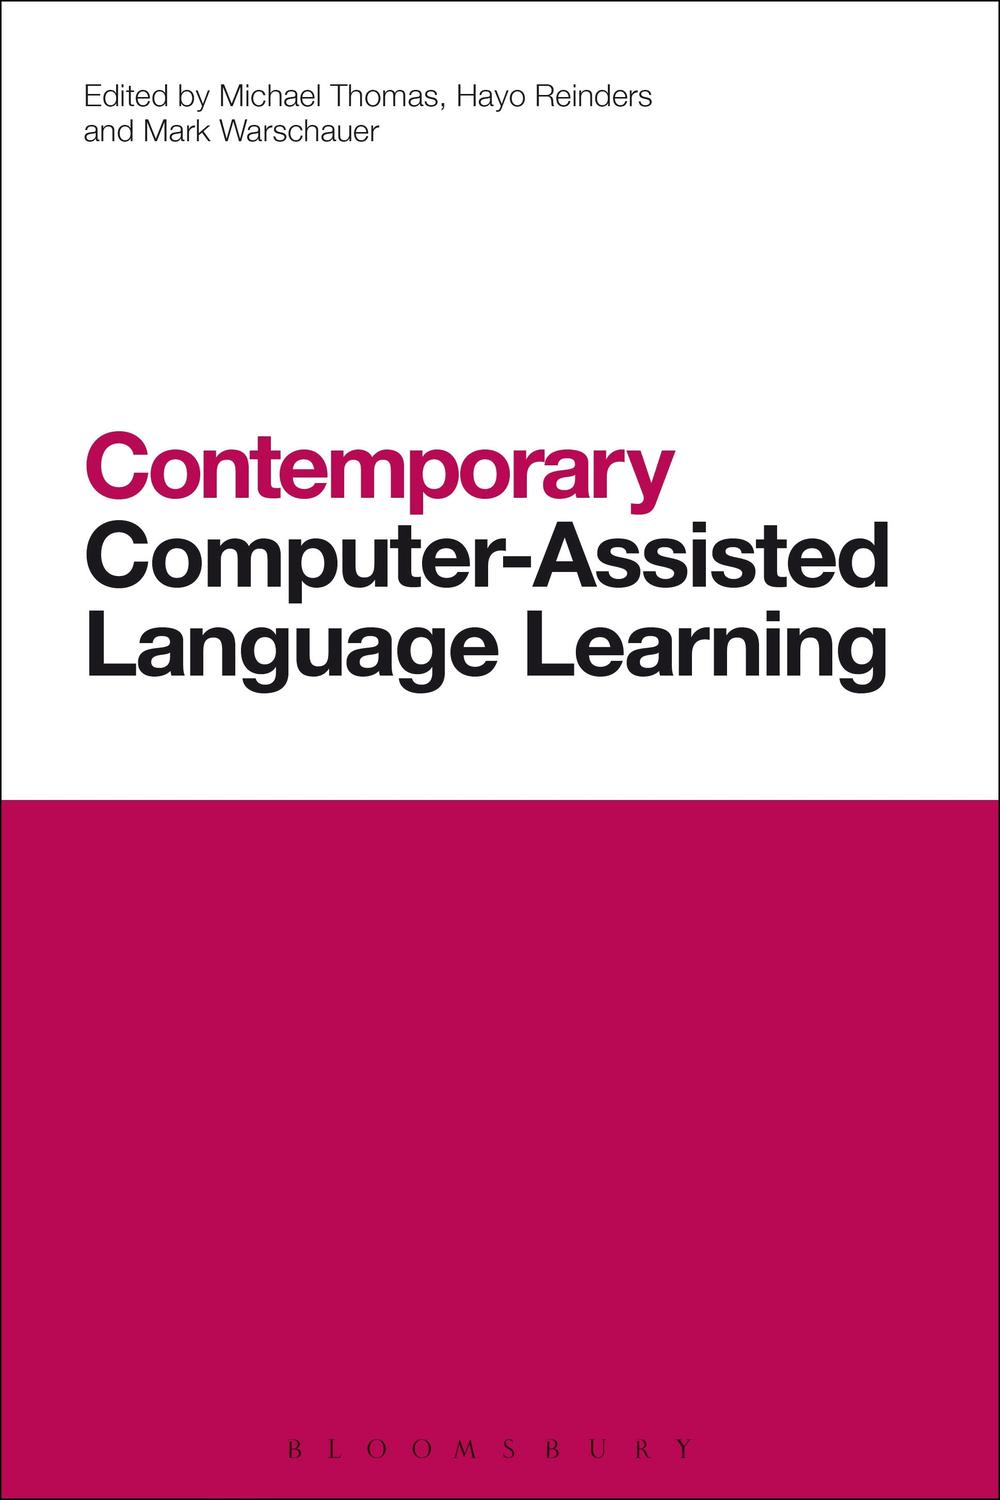 Contemporary Computer-Assisted Language Learning - Michael Thomas, Hayo Reinders, Mark Warschauer